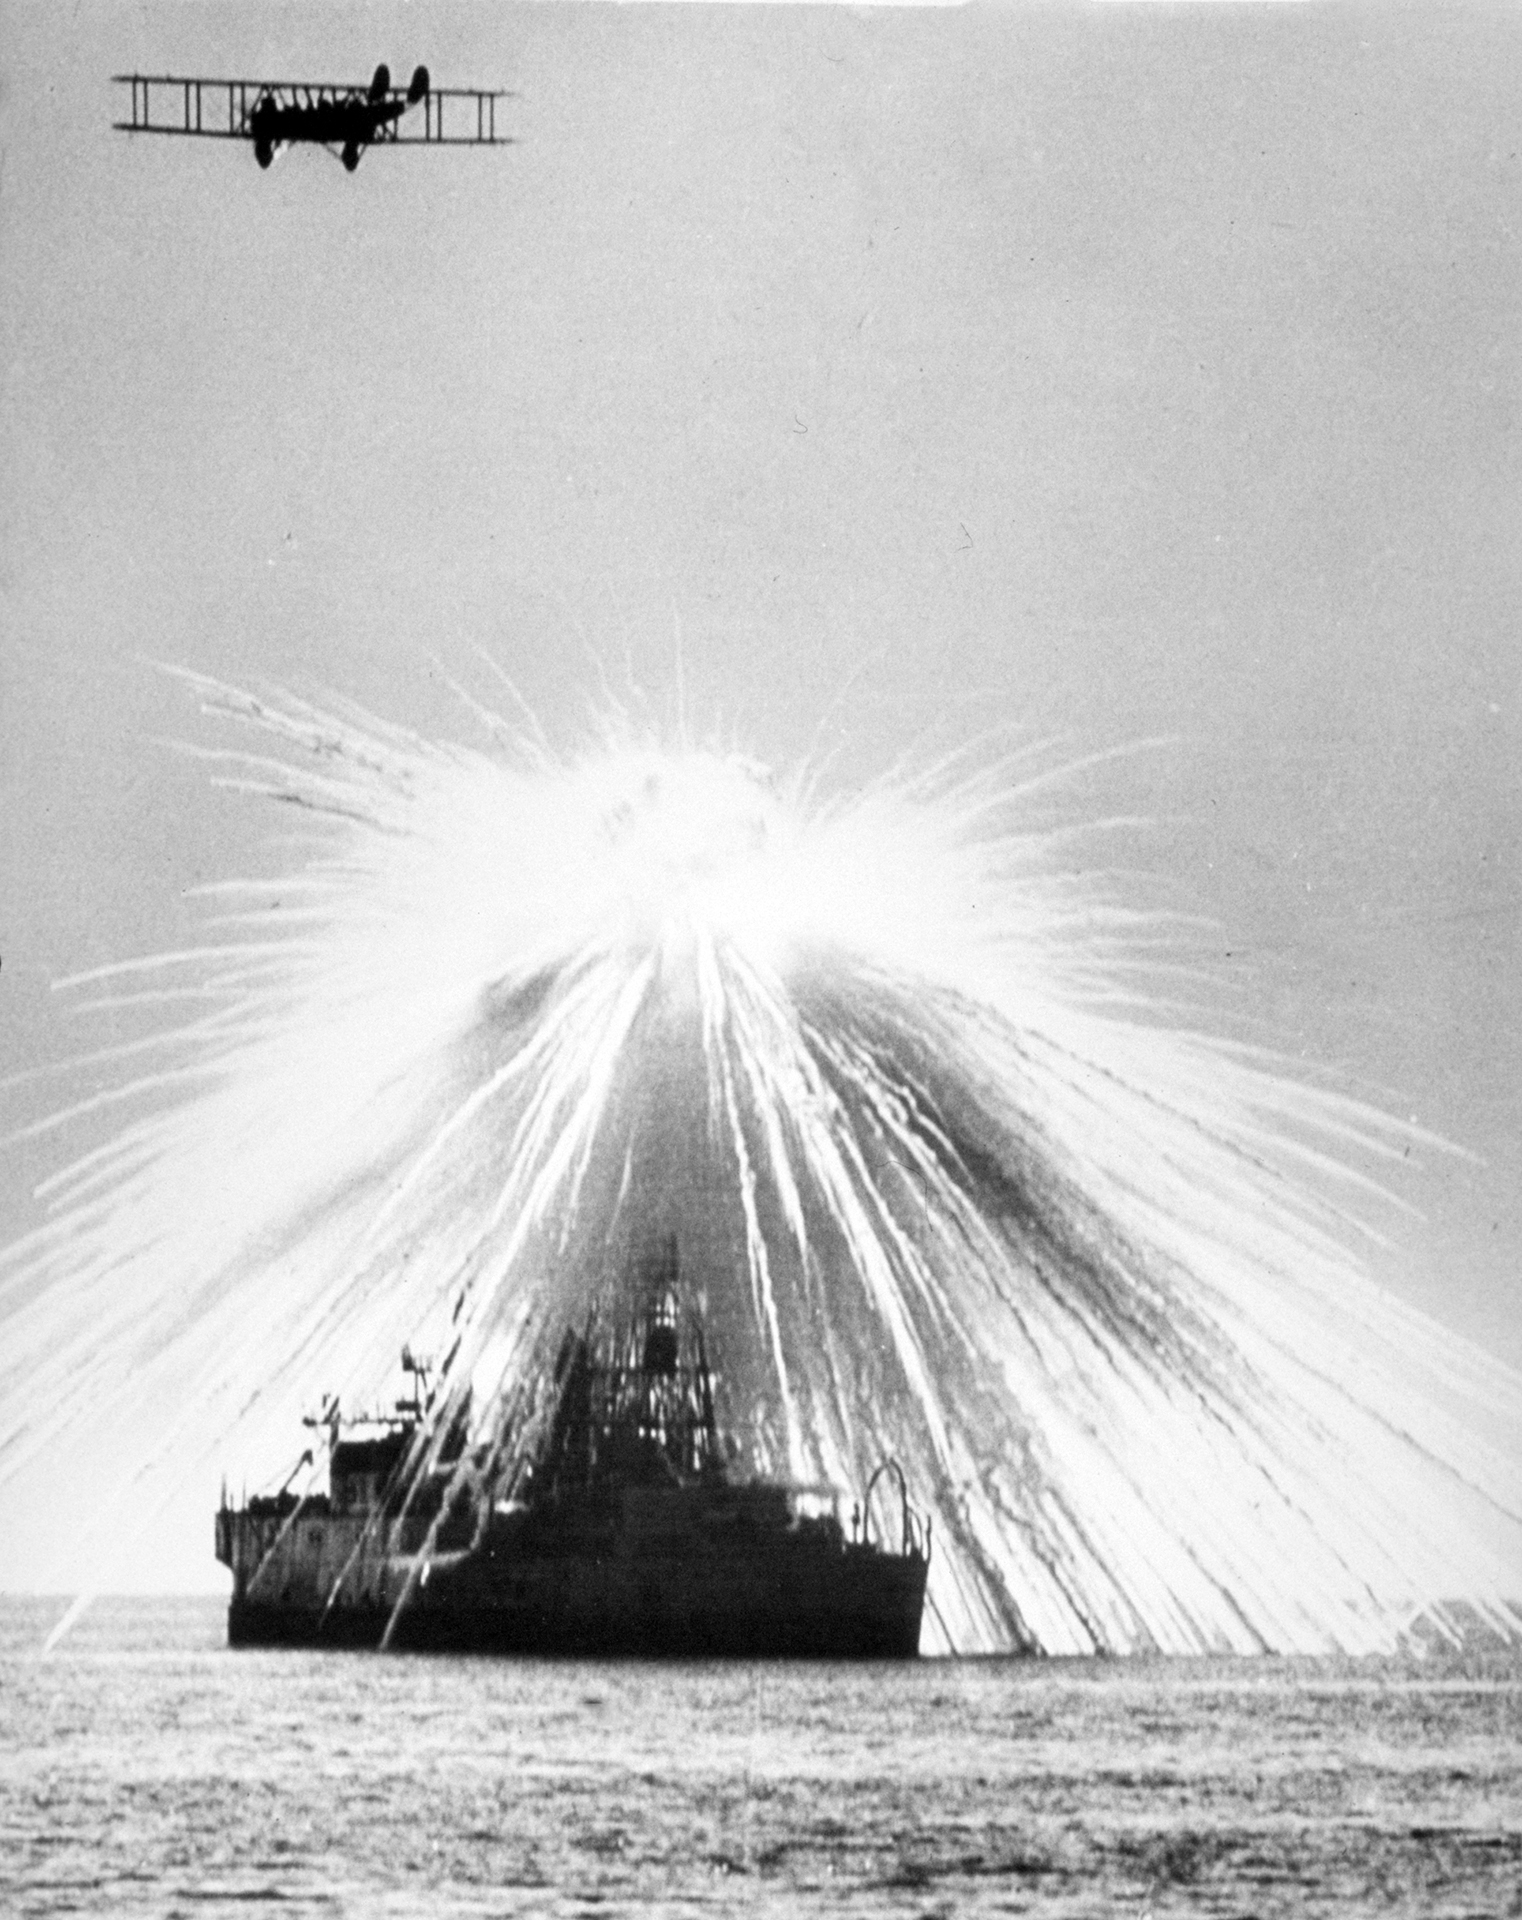 NBS-1 (MB-2) during an attack on a battleship in 1921